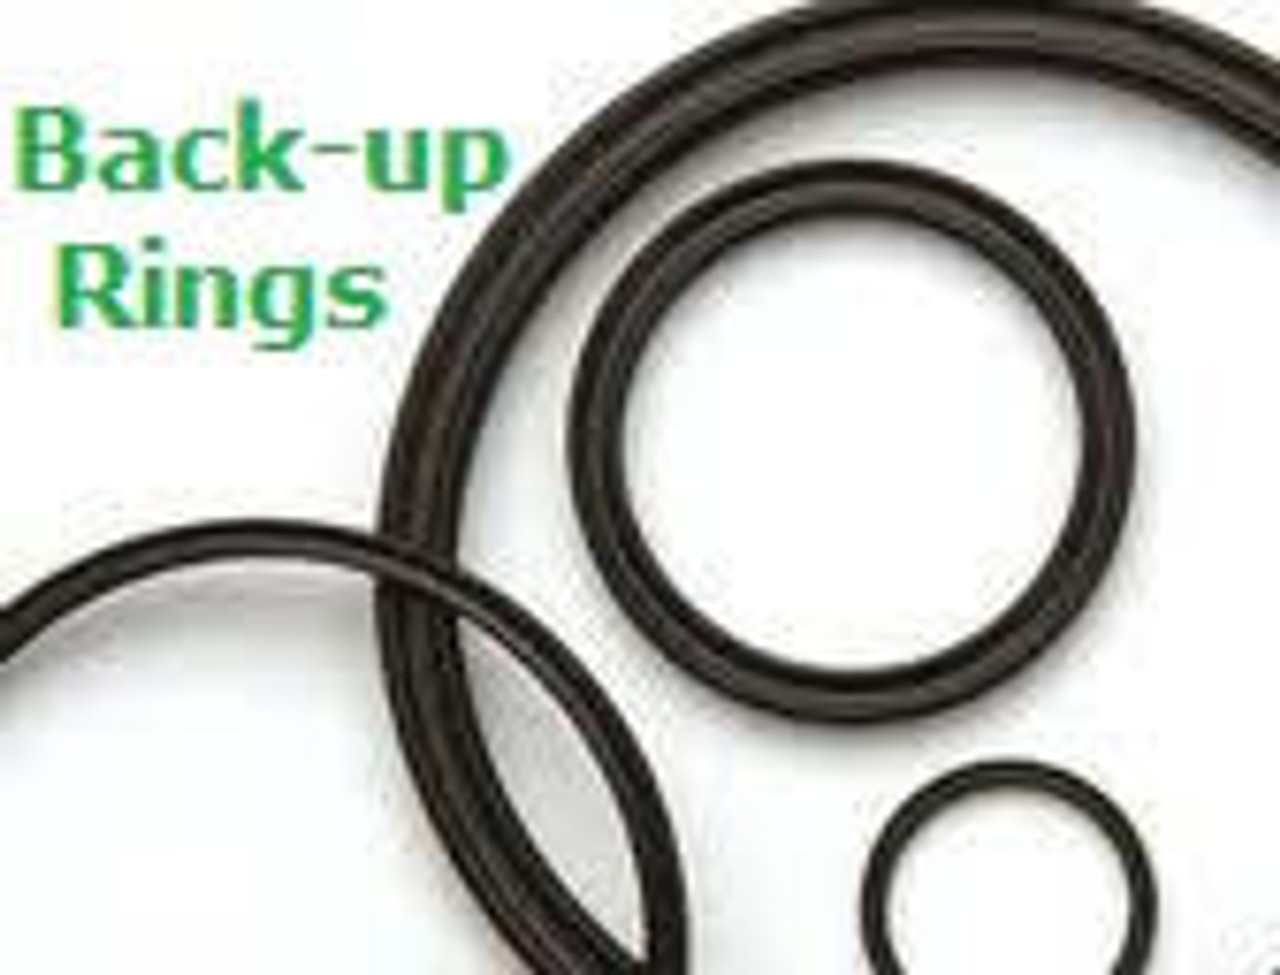 Backup Rings  Buna Size 264 Pric for 1 pc